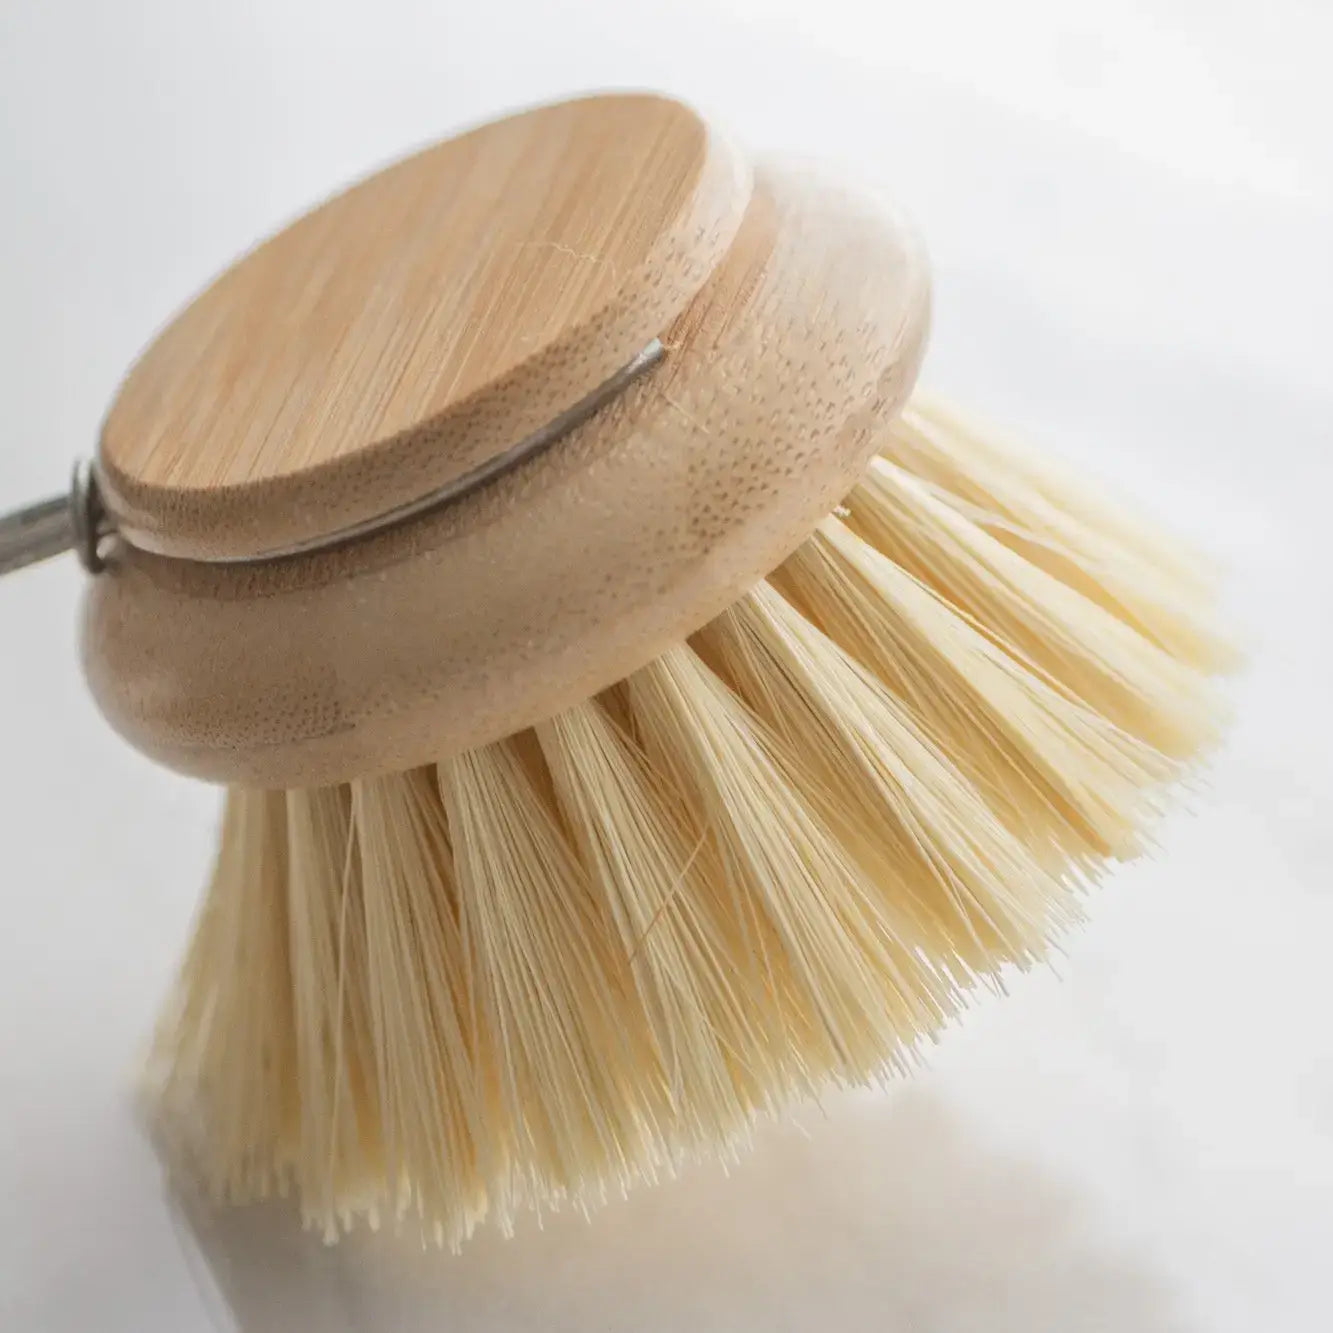 Round Replacement Head for Swedish Everyday Dish Brush - Stiff Tampico  Bristles - The Foundry Home Goods